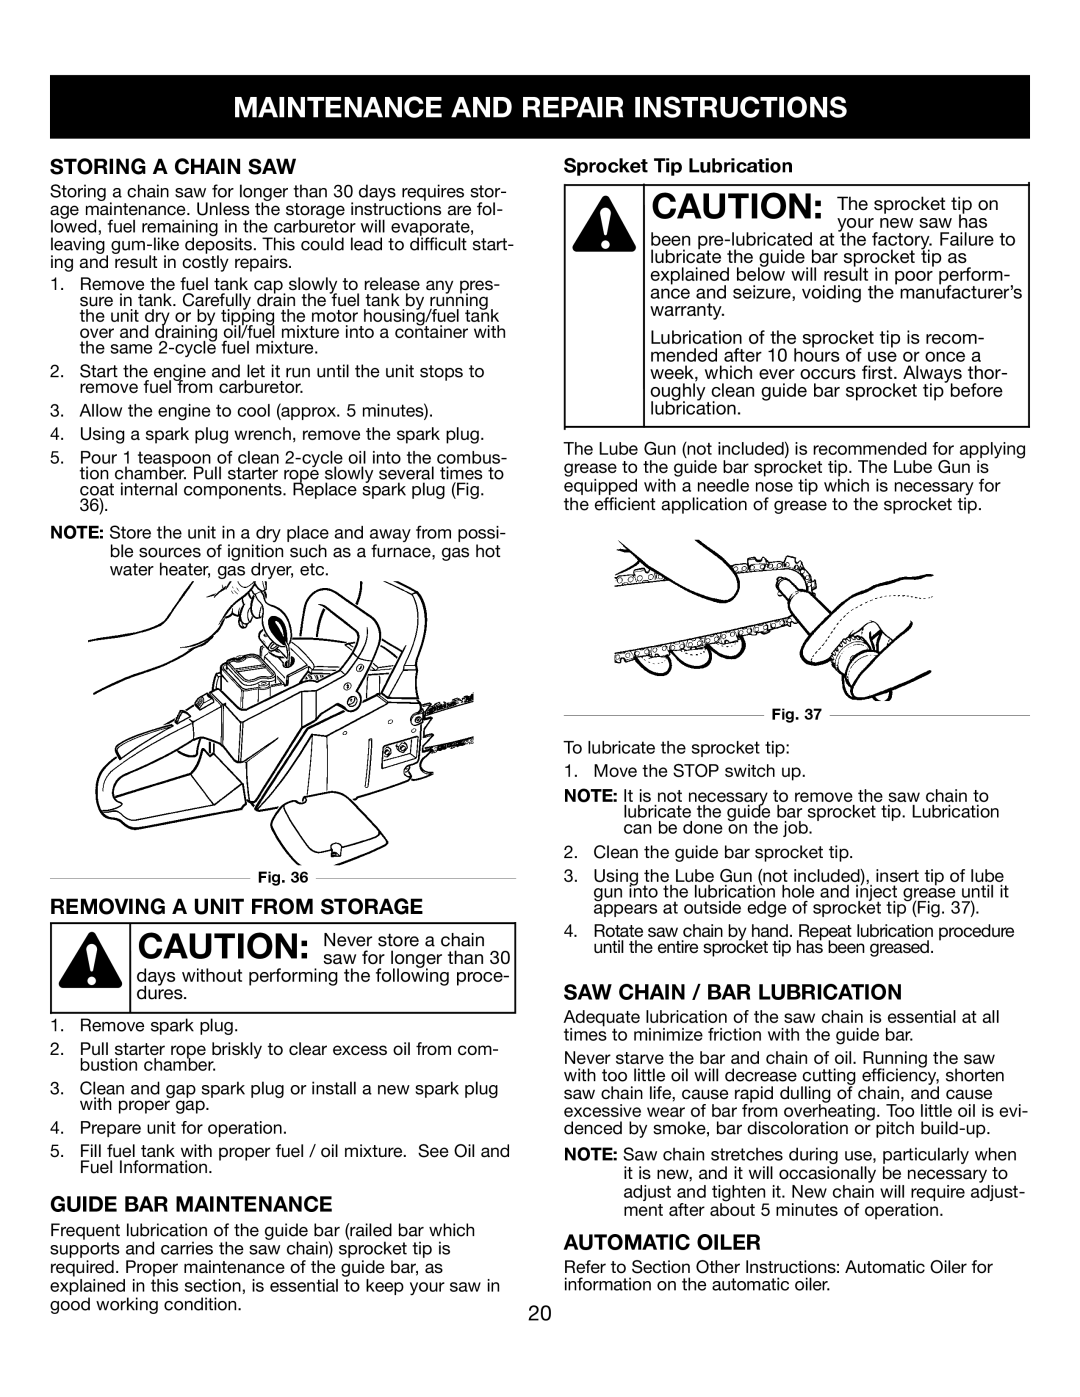 Craftsman 316350840 manual Maintenance And Repair Instructions, Storing A Chain Saw, Removing A Unit From Storage 